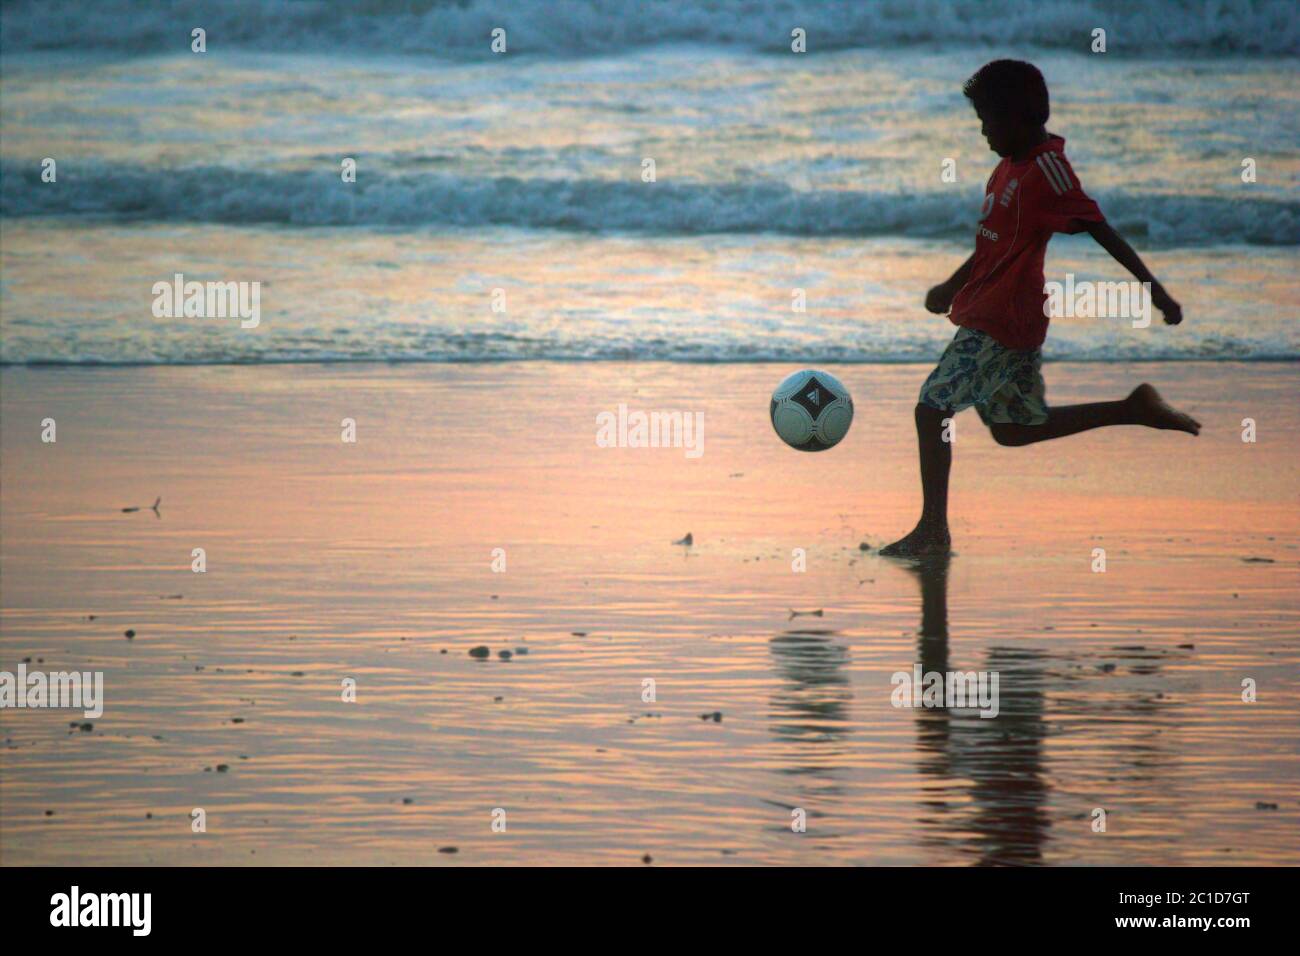 Kid playing with football in Goa beach (selective focus) Stock Photo